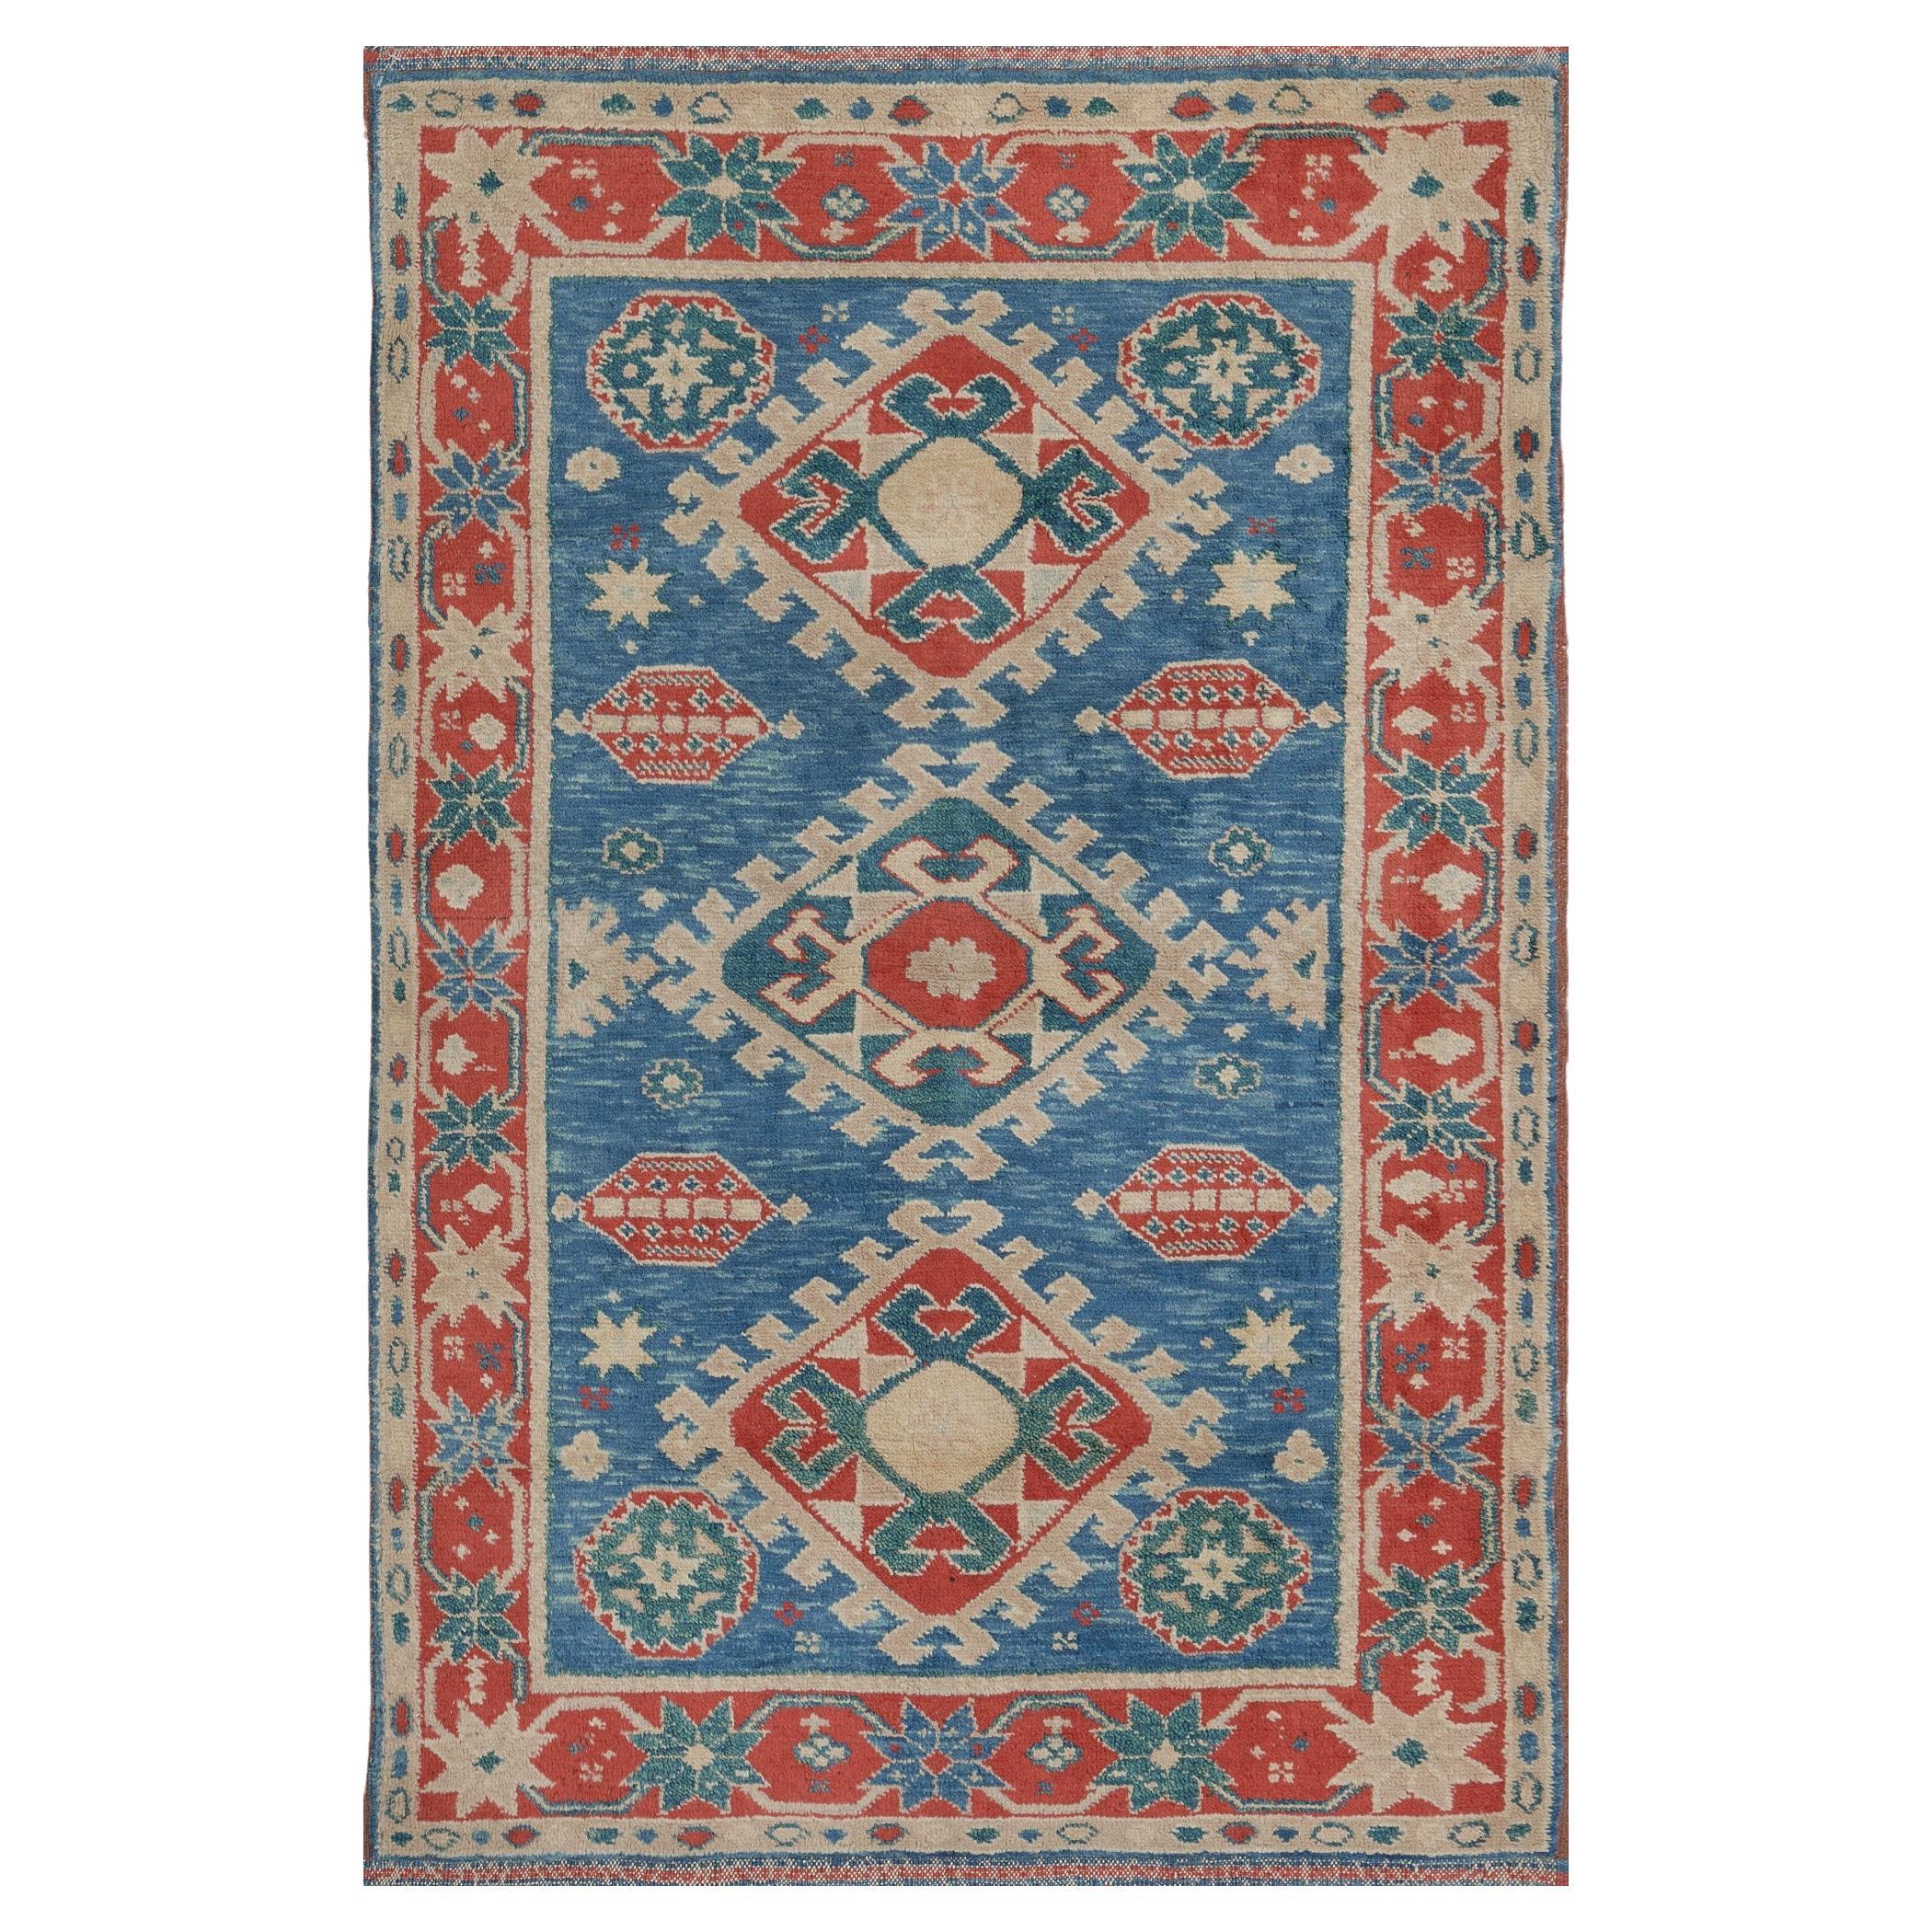 Traditional Hand-Woven Floral Wool Turkish Rug